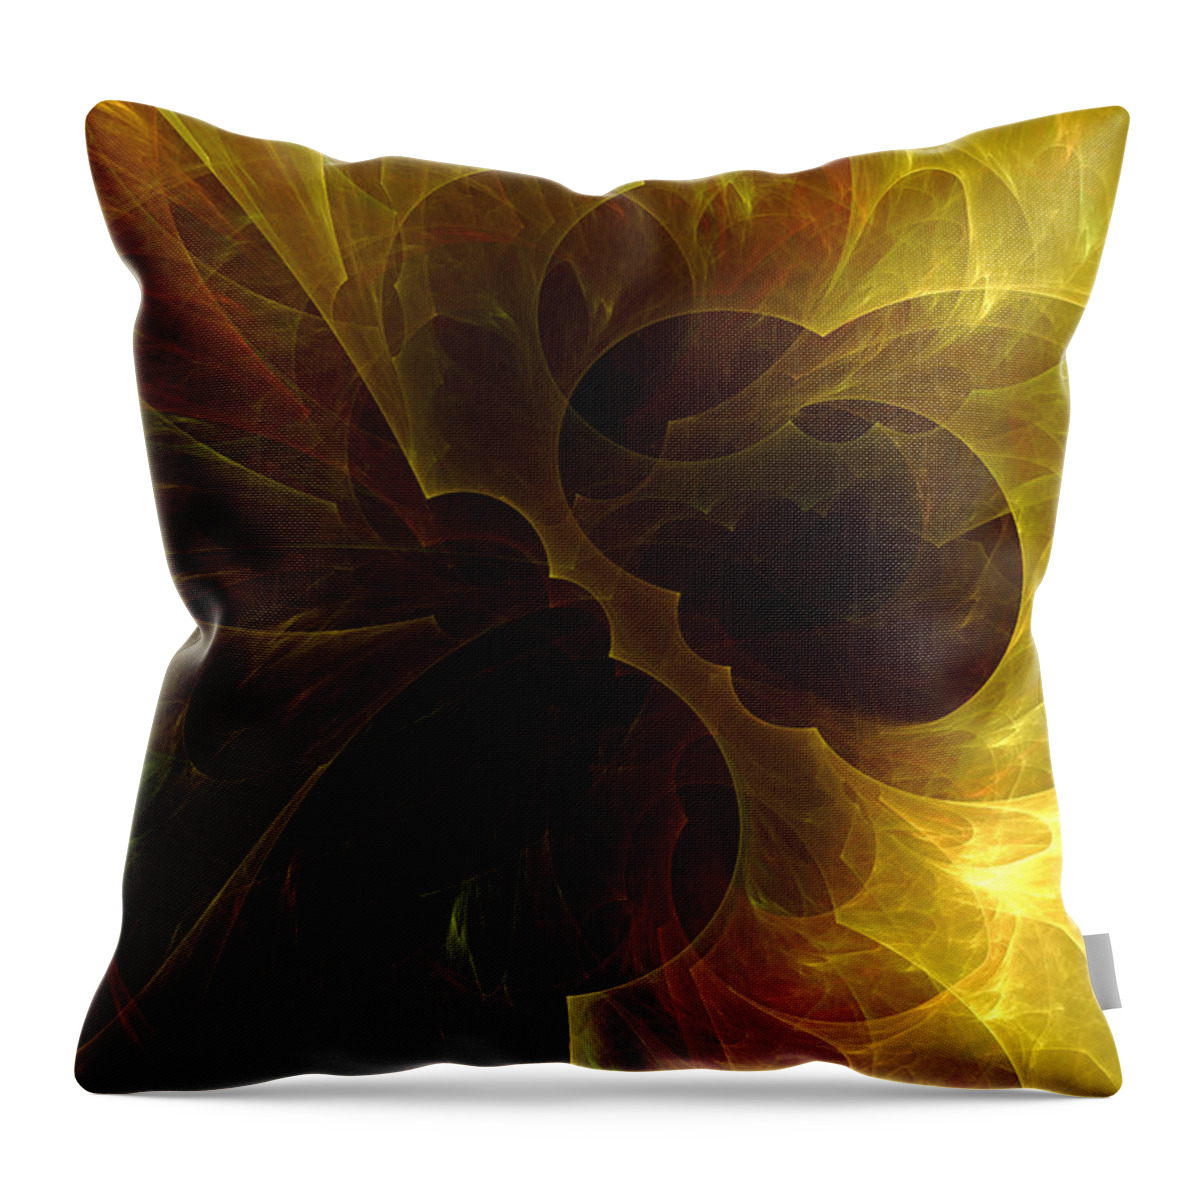 Fractal Throw Pillow featuring the digital art Fiat Lux by Jeff Iverson